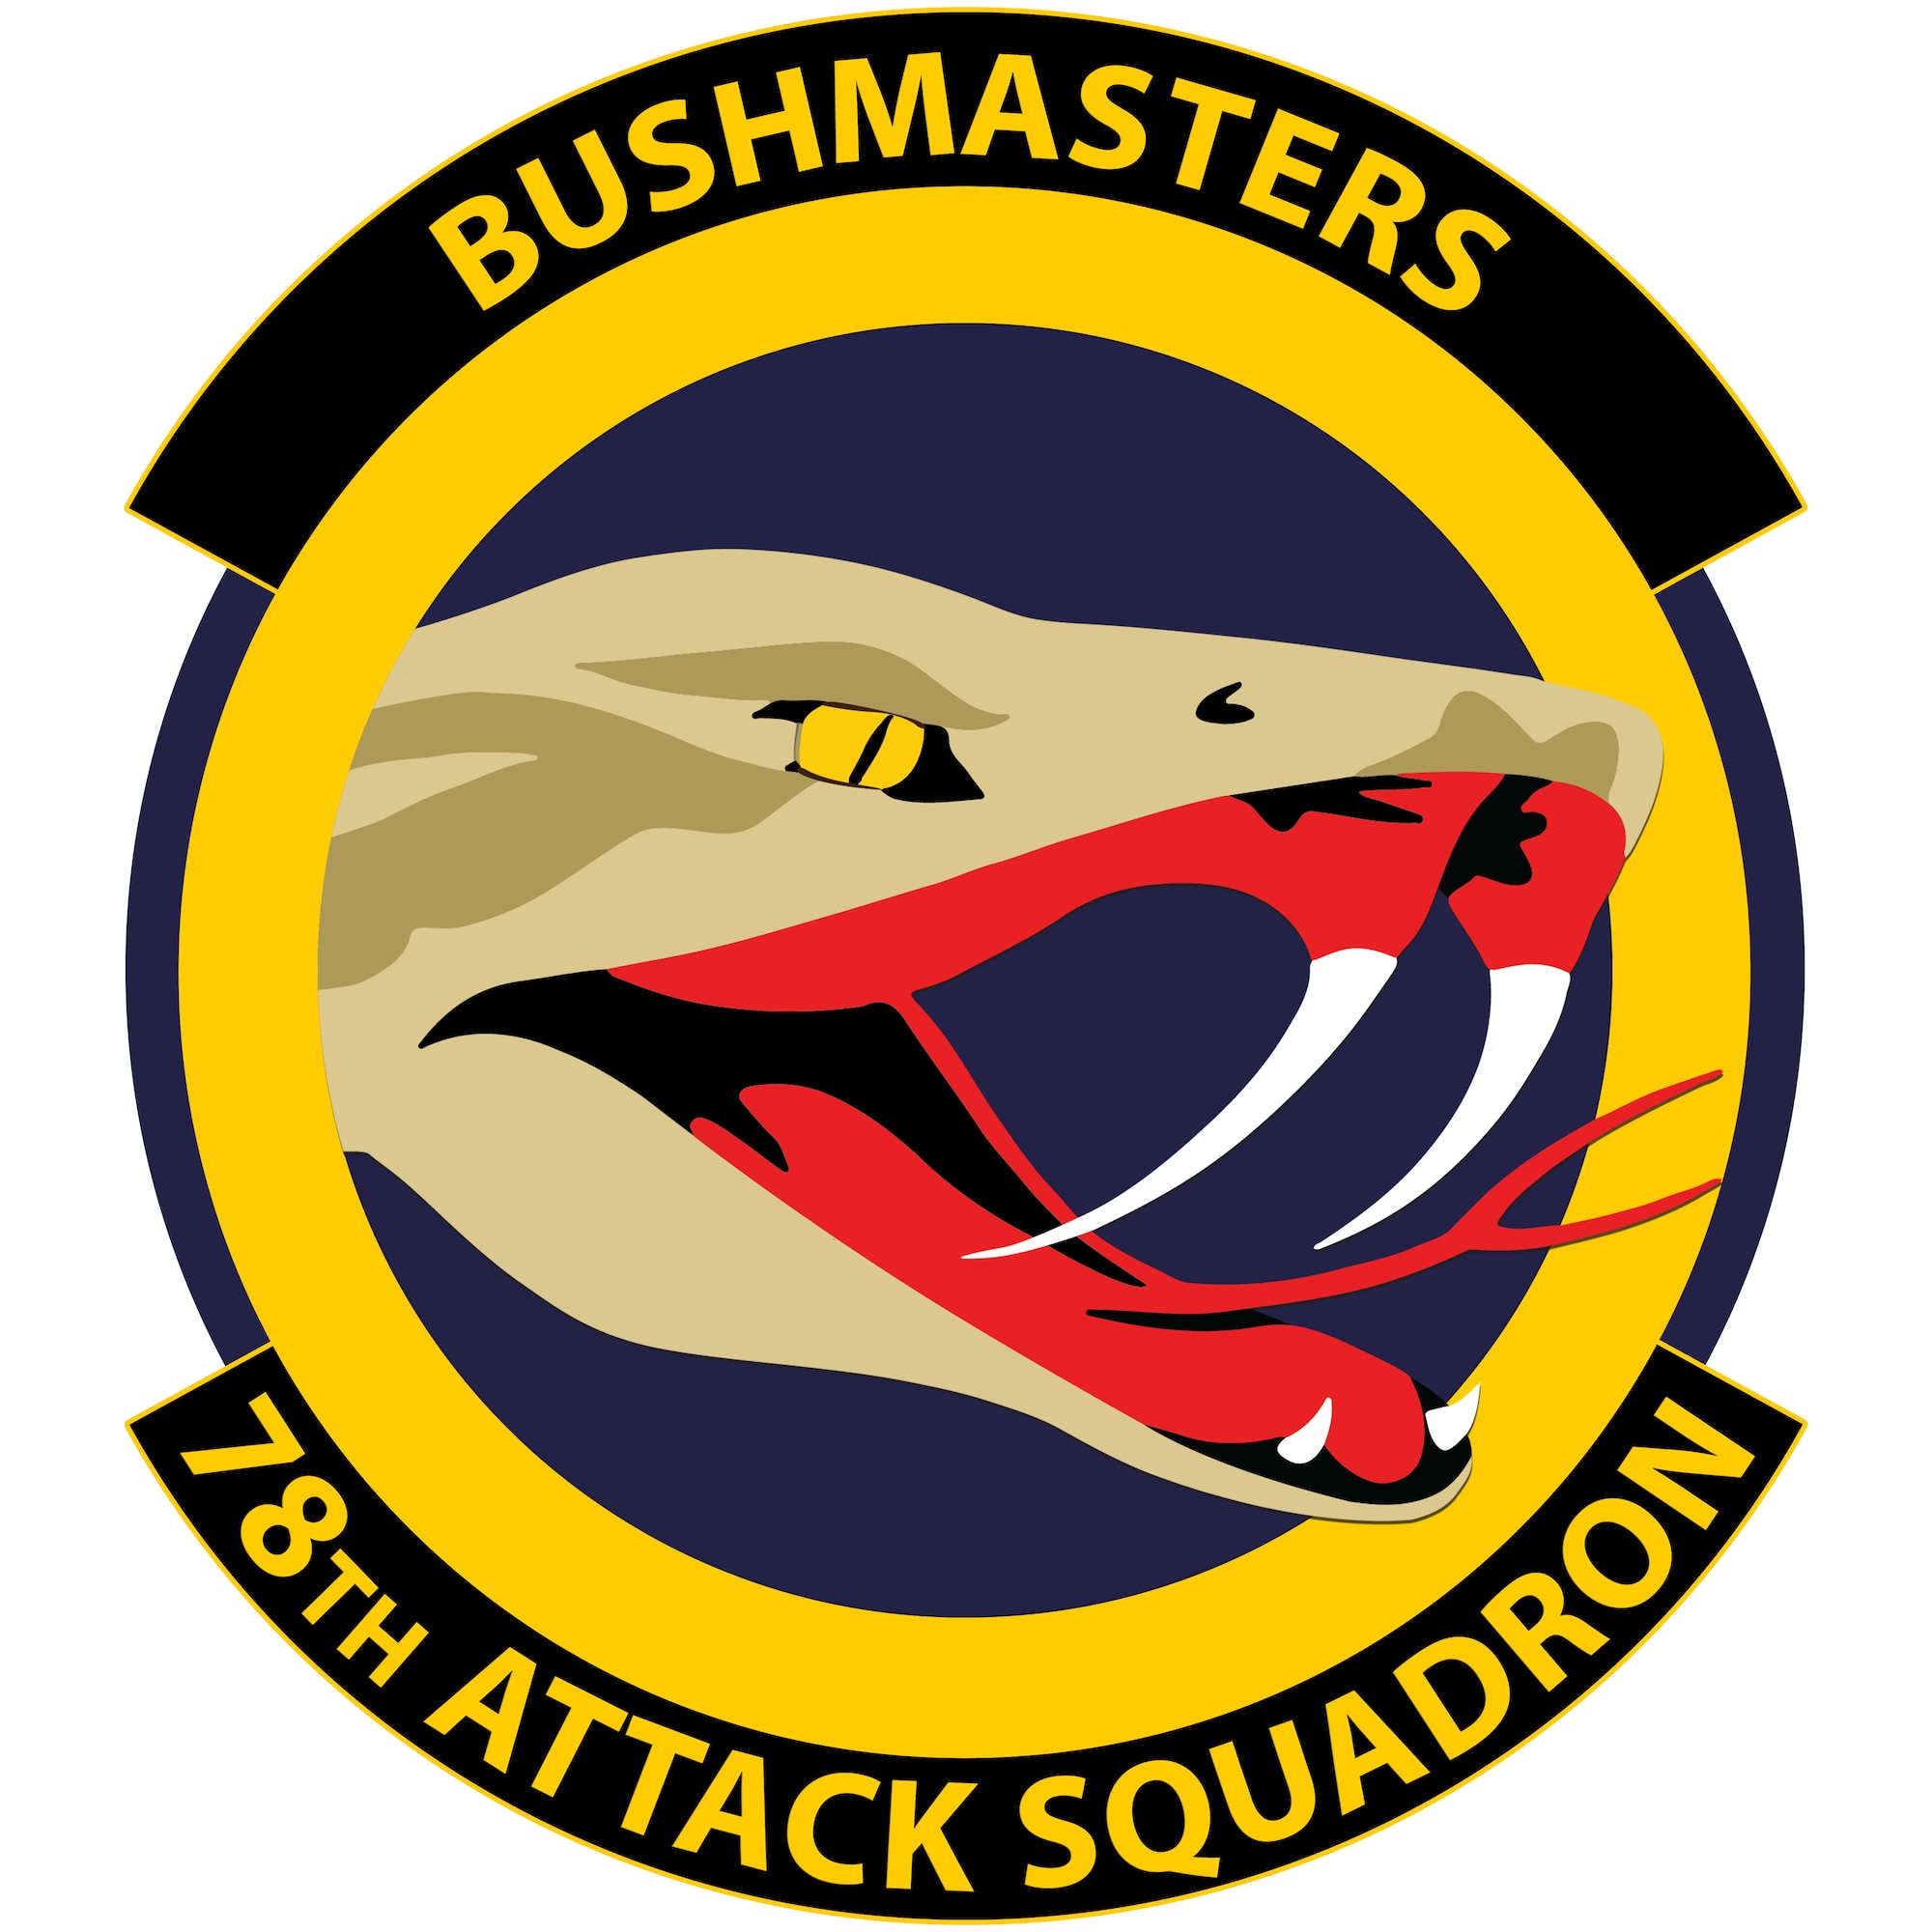 The official emblem of the 78th Attack Squadron